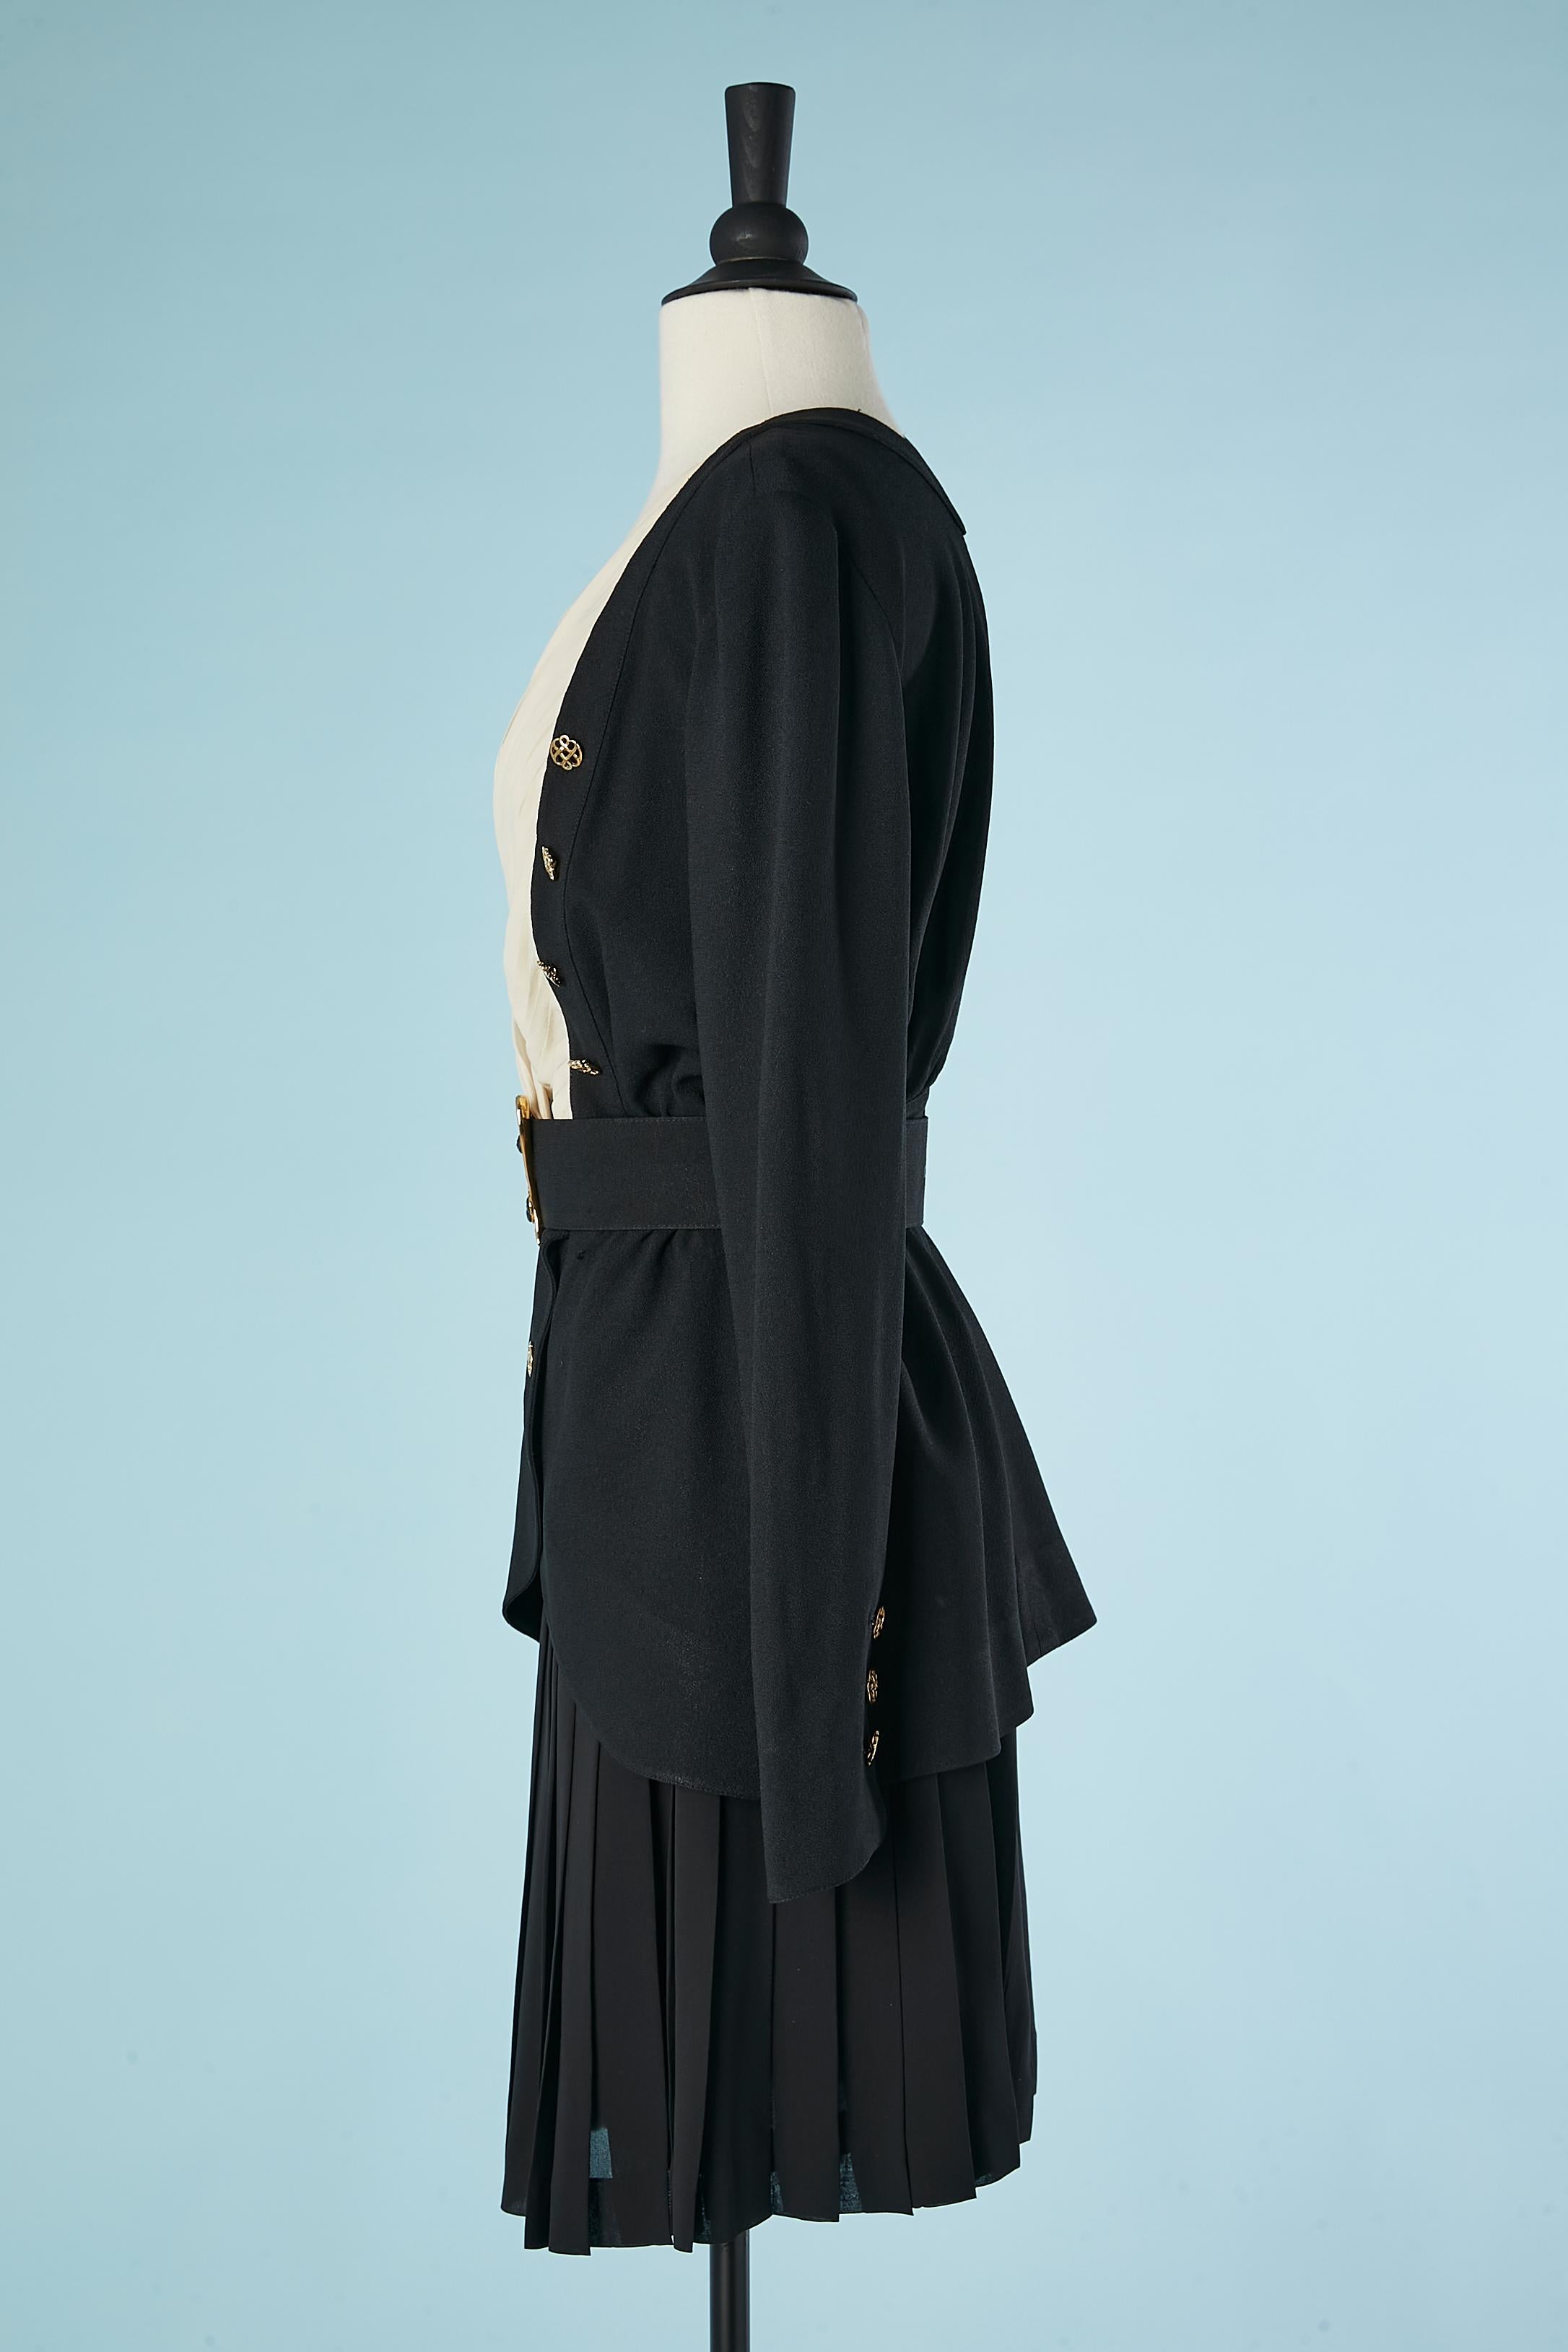 Crêpe & silk chiffon with gold buttons and belt skirt-suit Karl Lagerfeld  For Sale 1